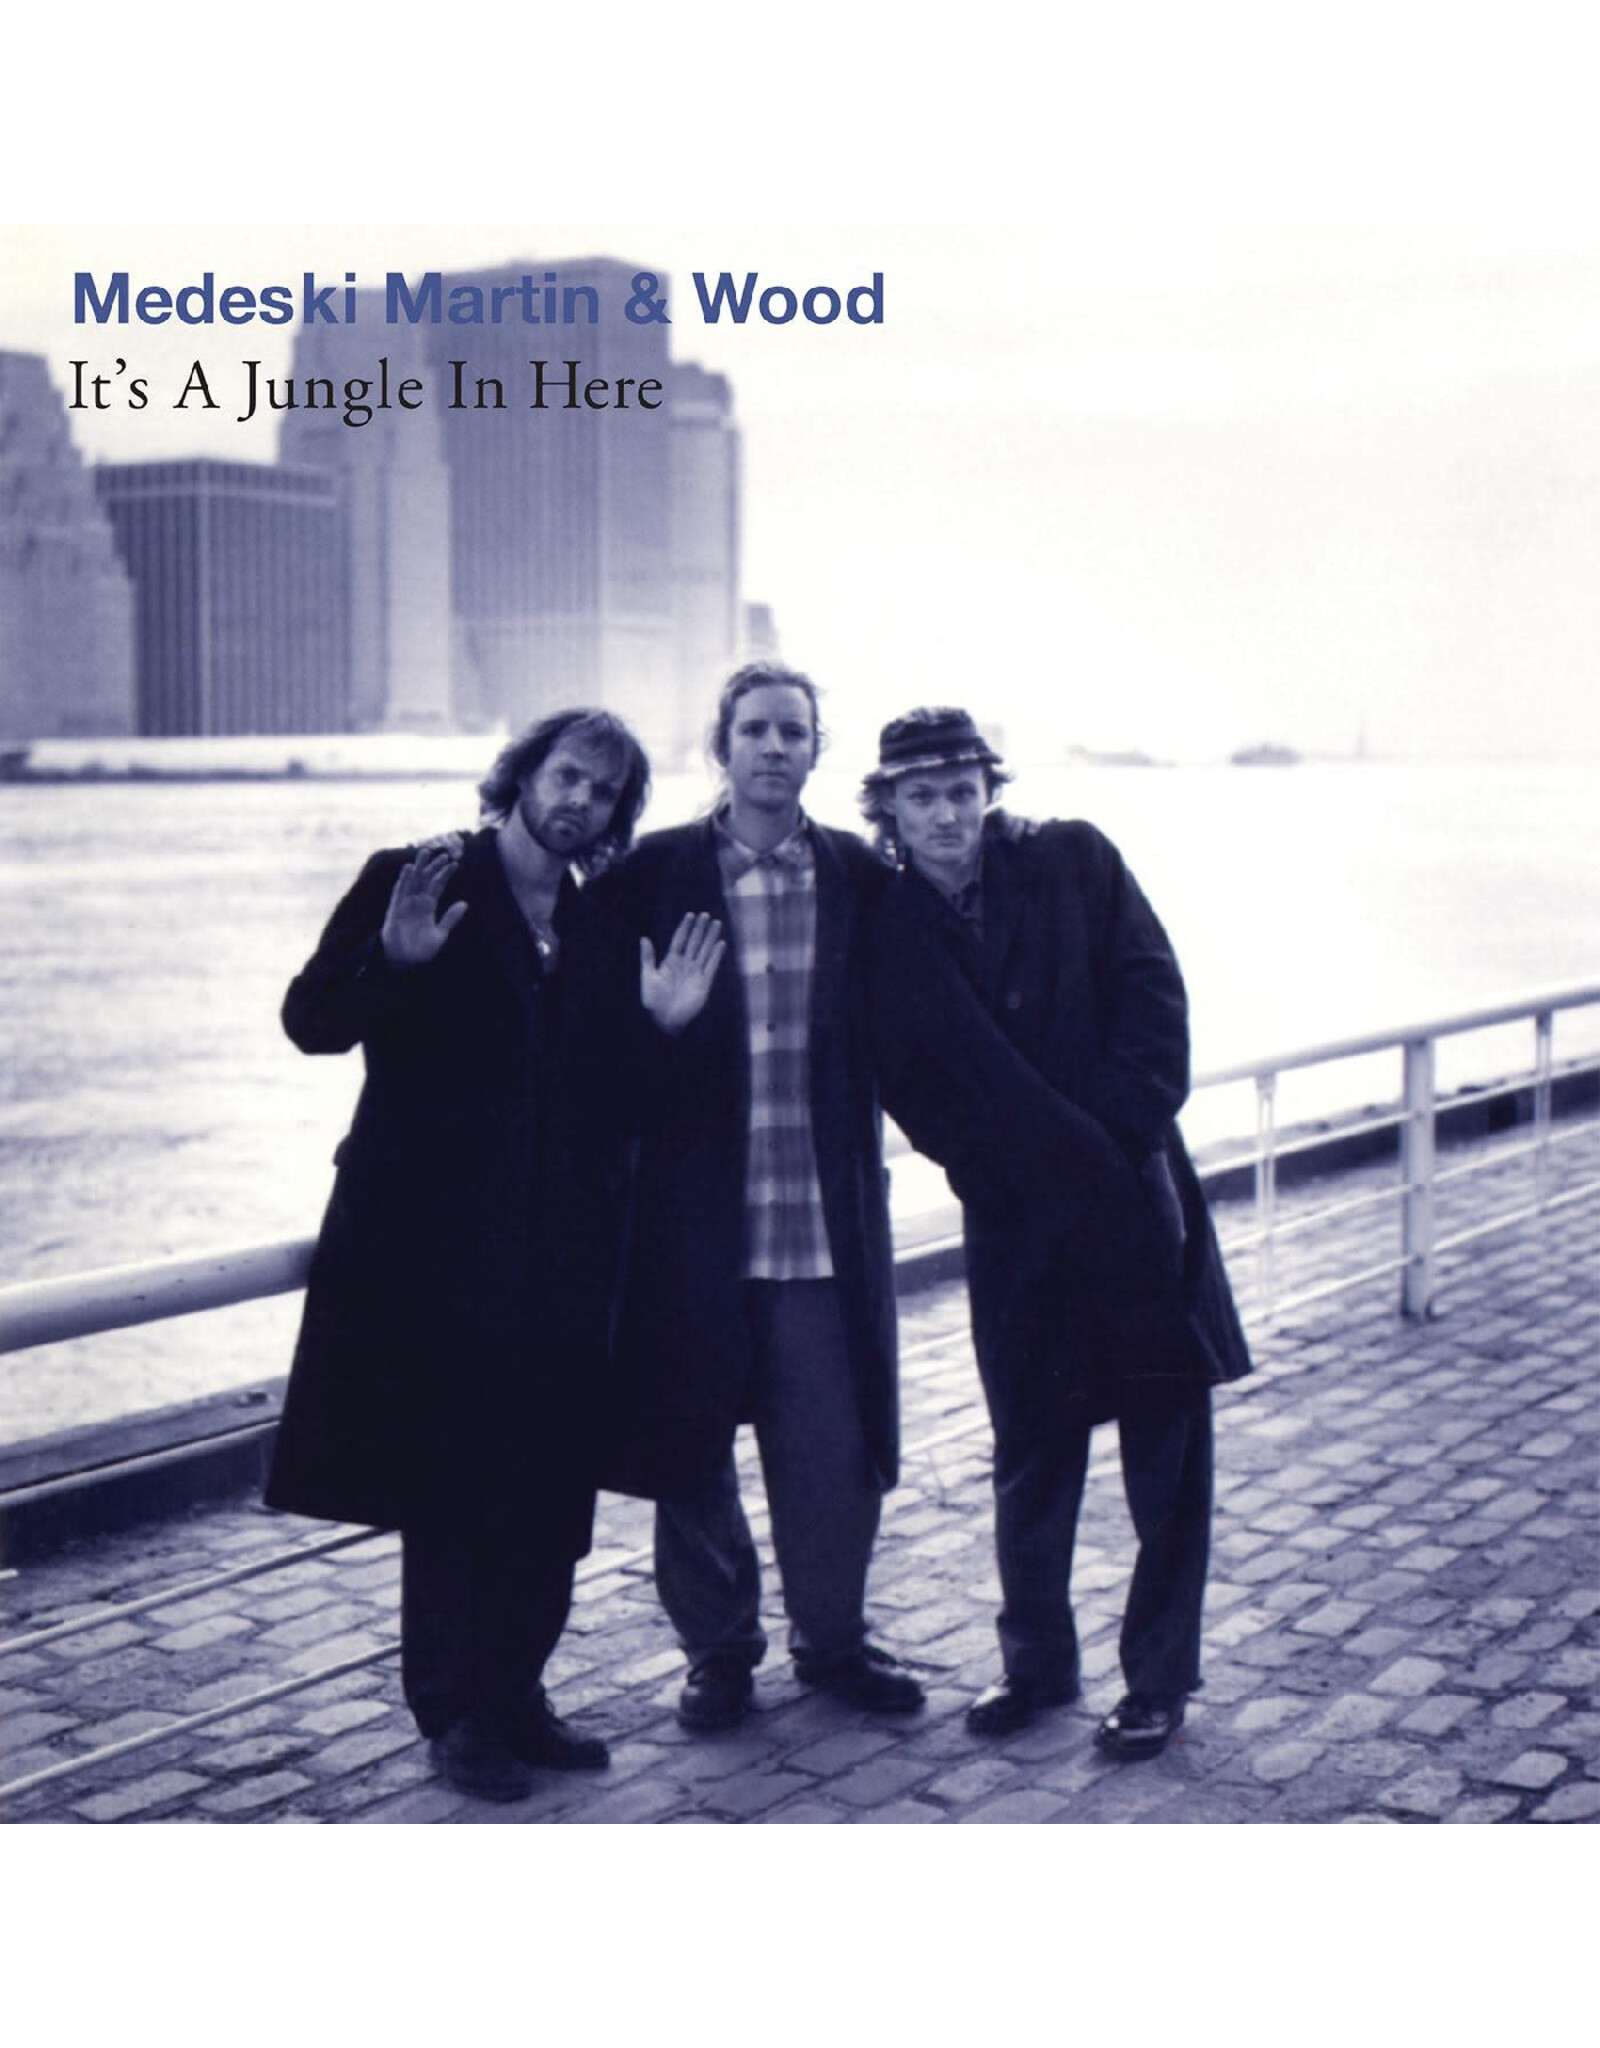 Real Gone Medeski, Martin & Wood: It's a Jungle in Here LP